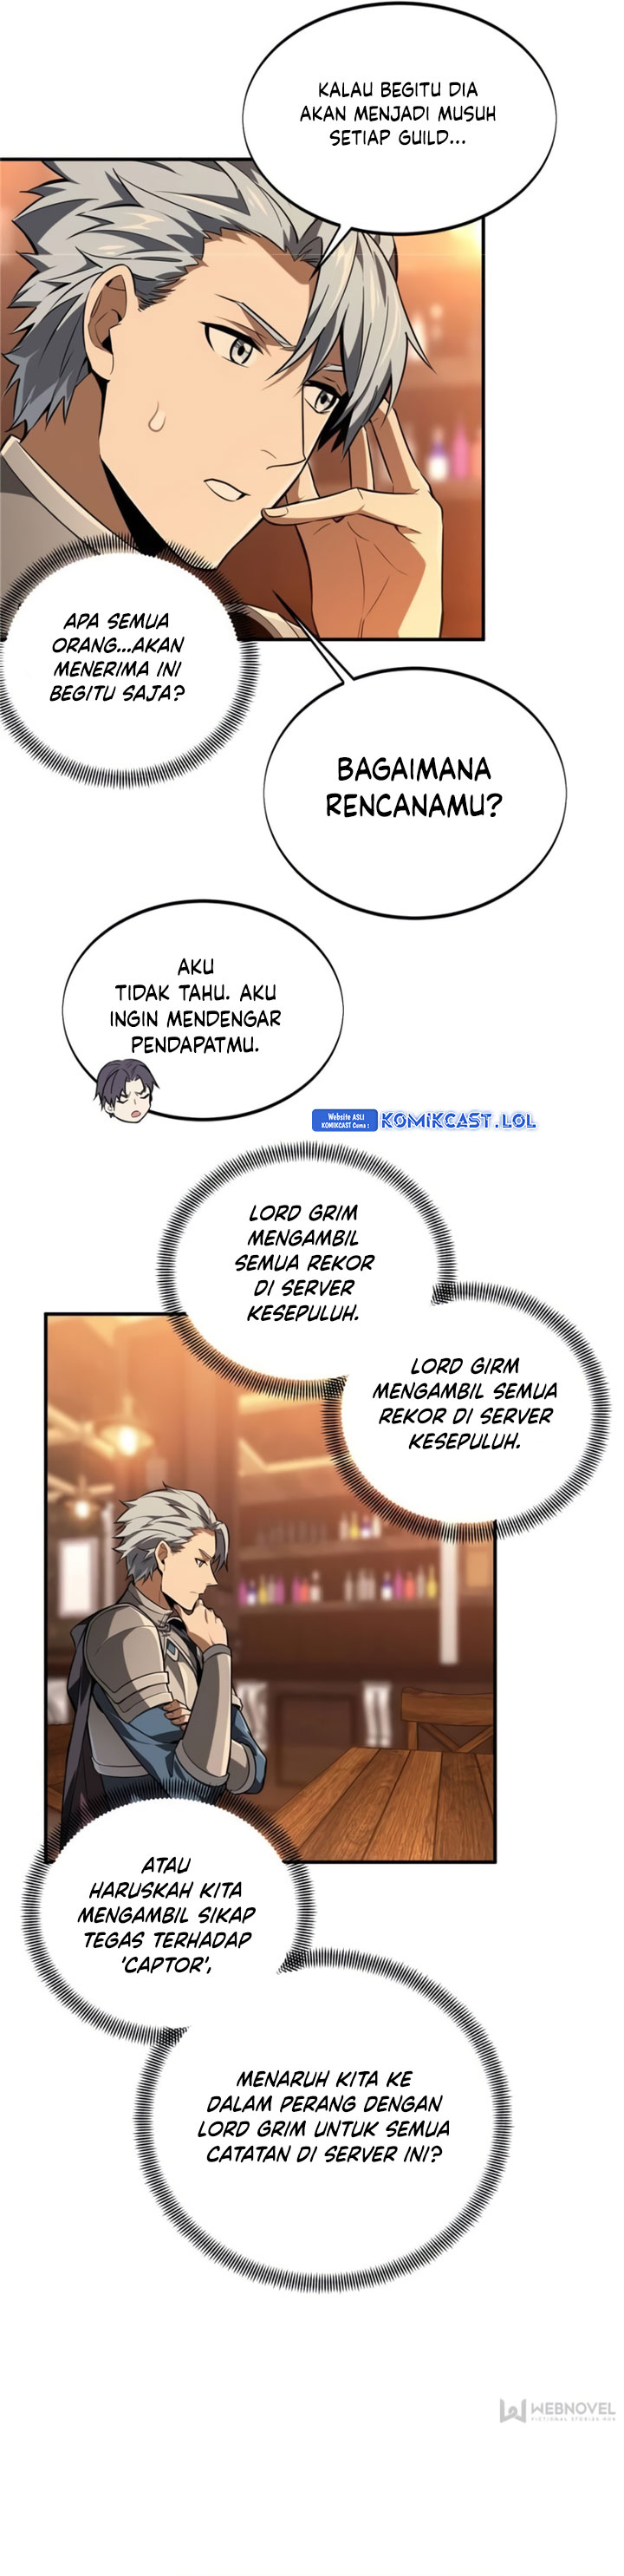 The King’s Avatar (2020) Chapter 78